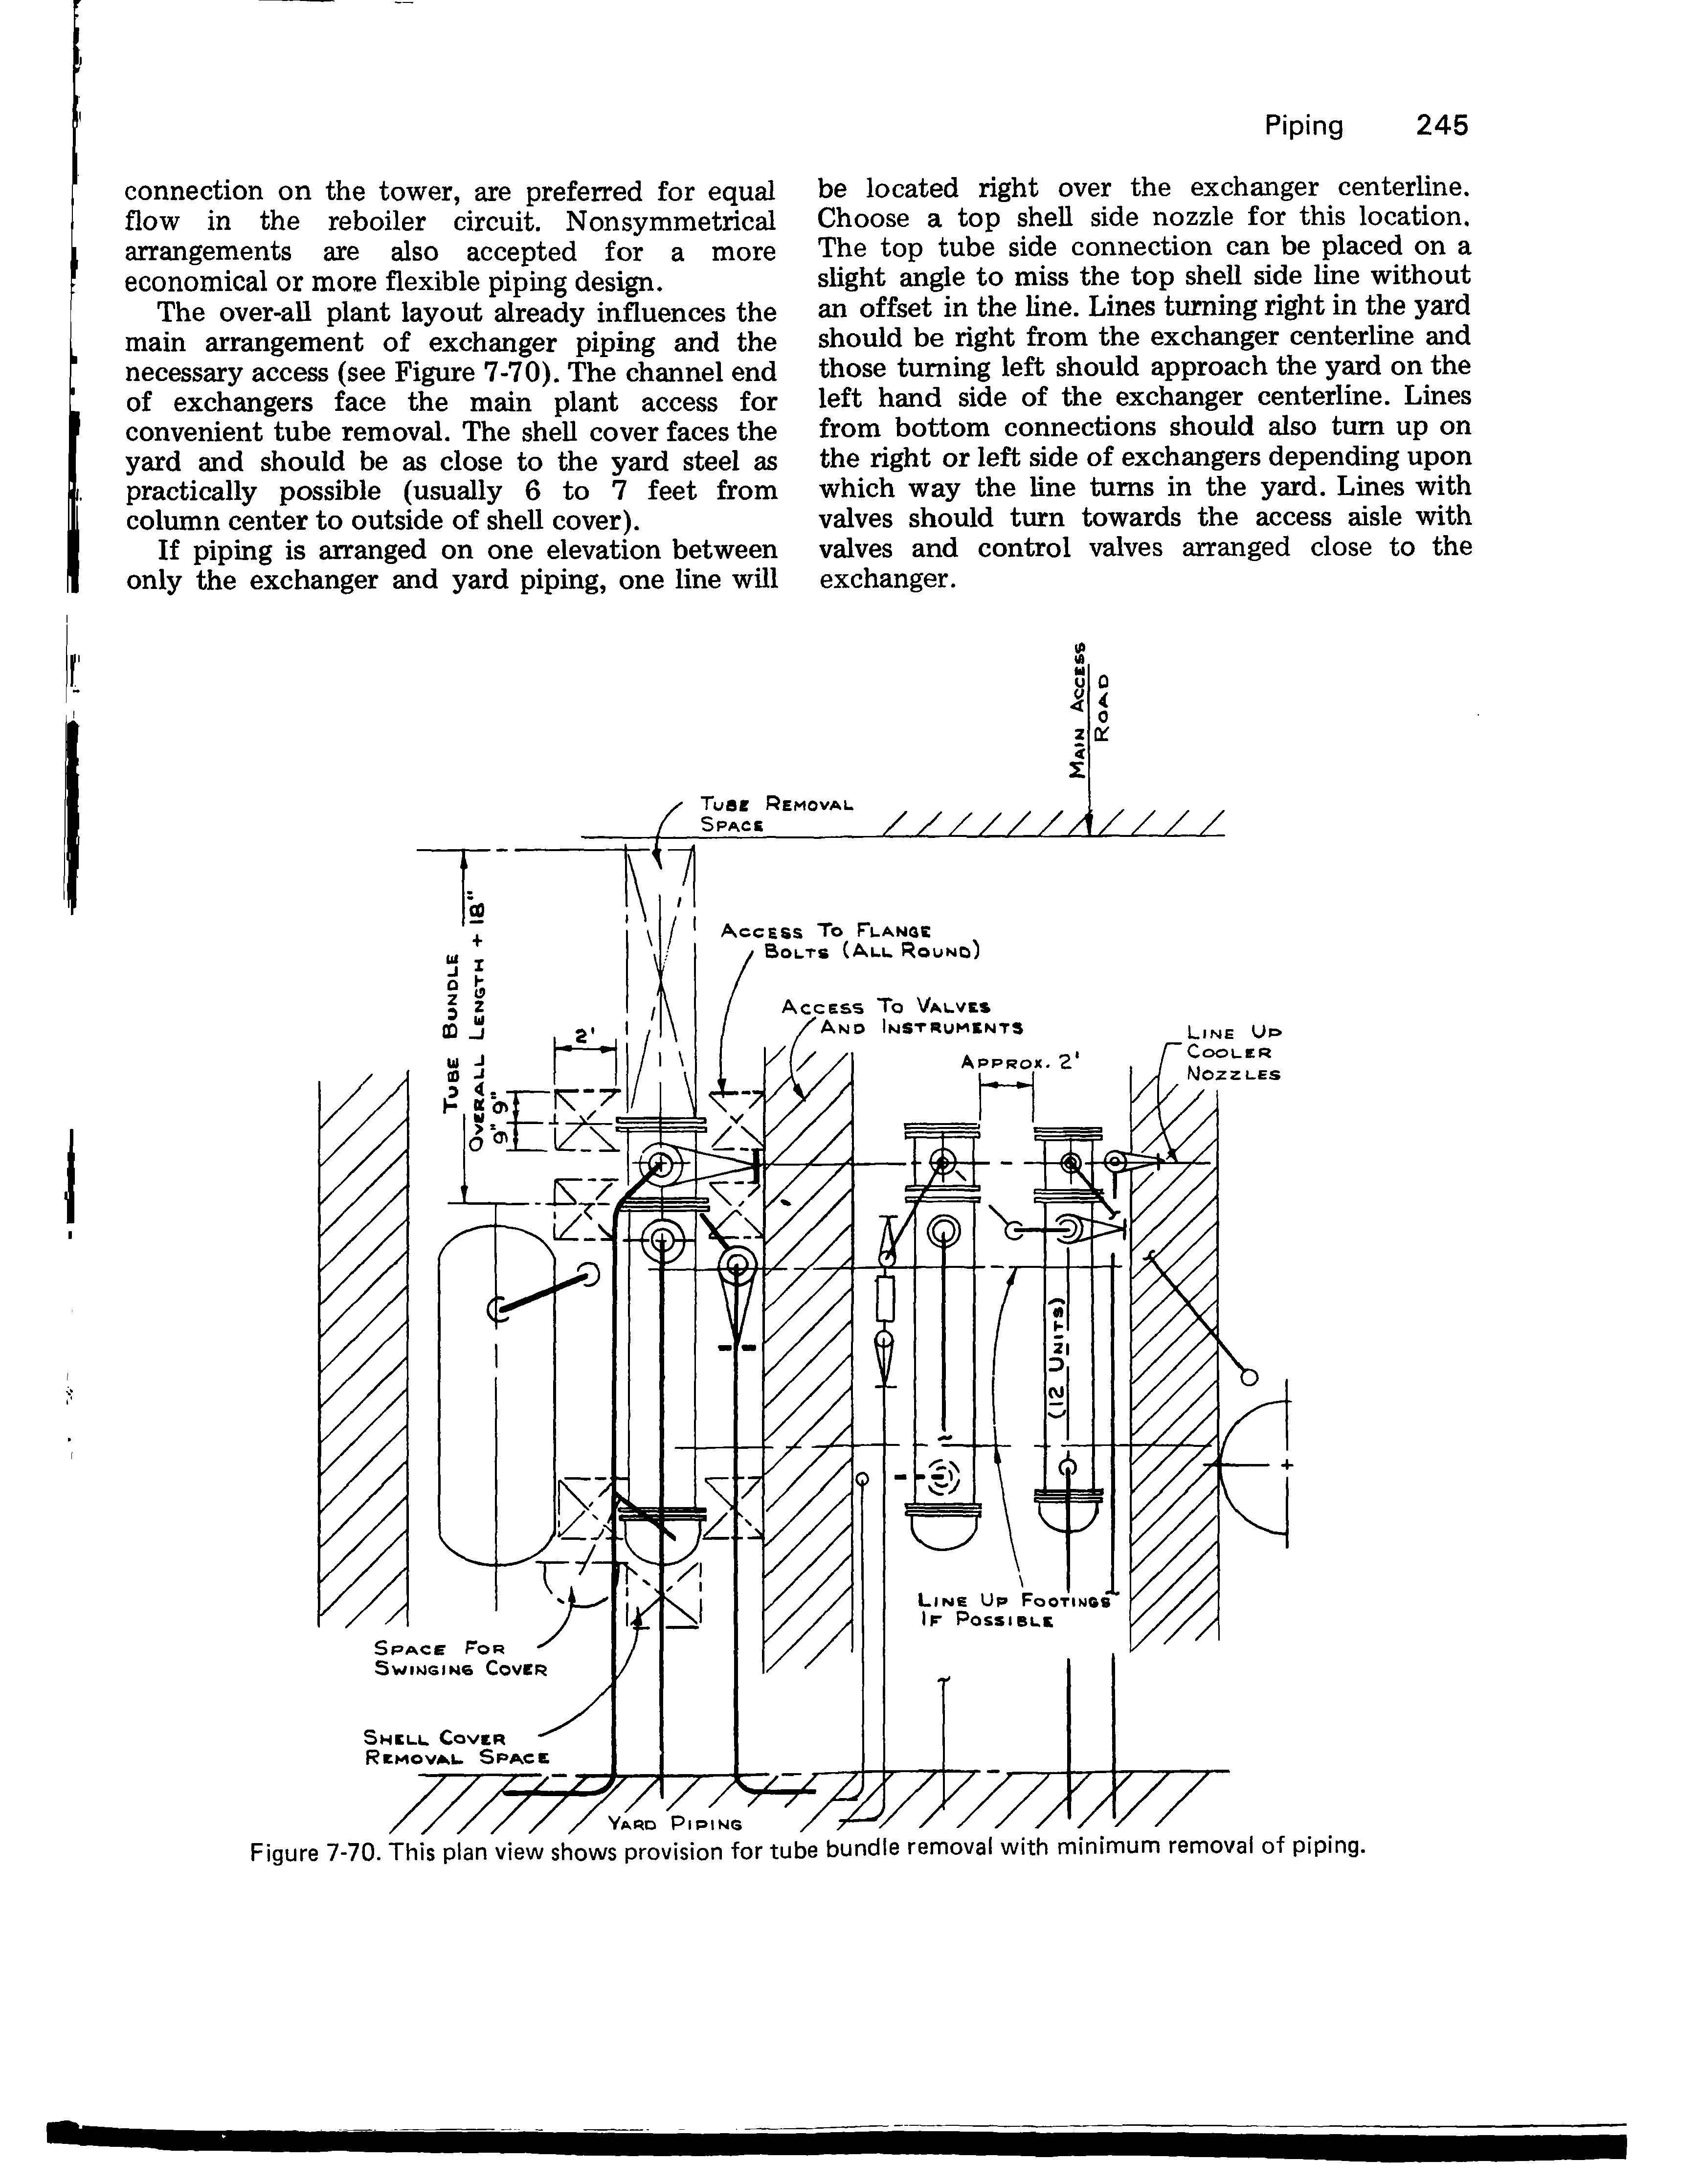 Figure 7-70. This plan view shows provision for tube bundle removal with minimum removal of piping.